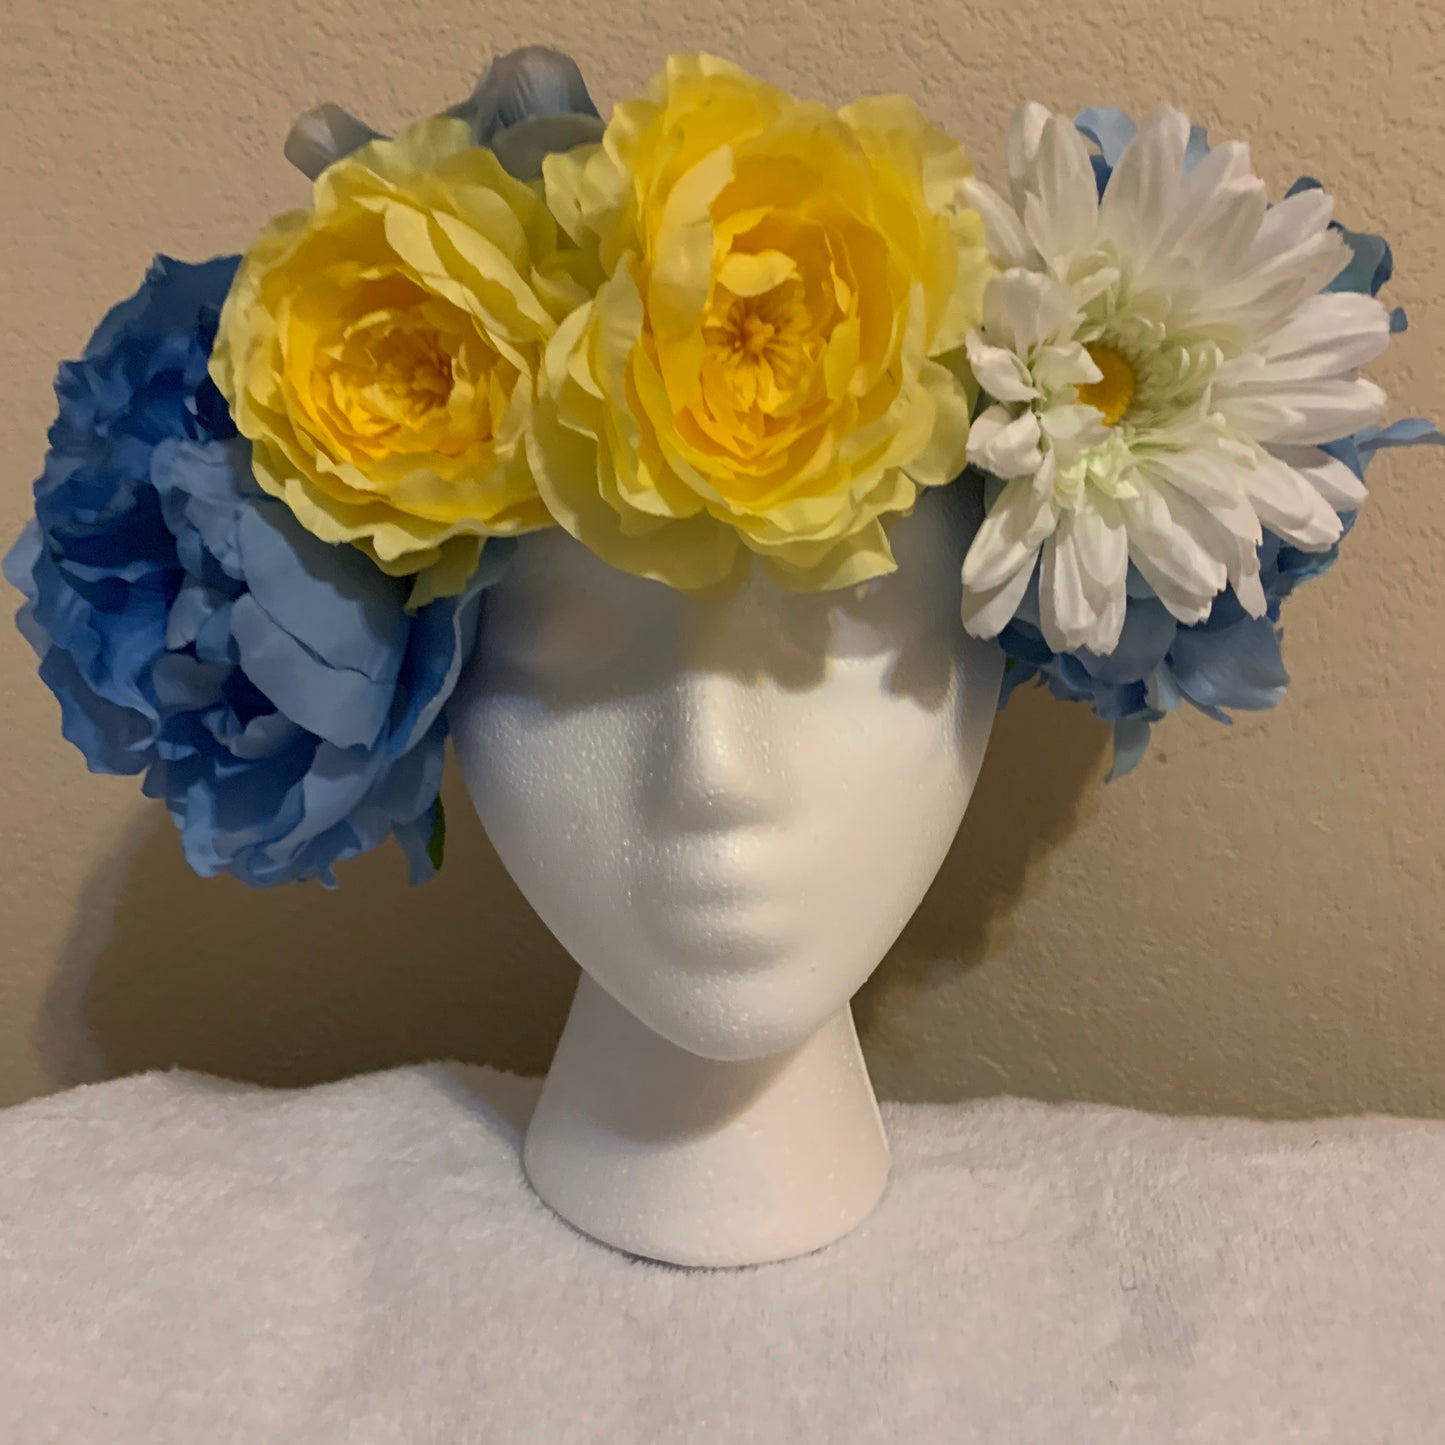 Large Wreath - Blue, Yellow, and White Flowers